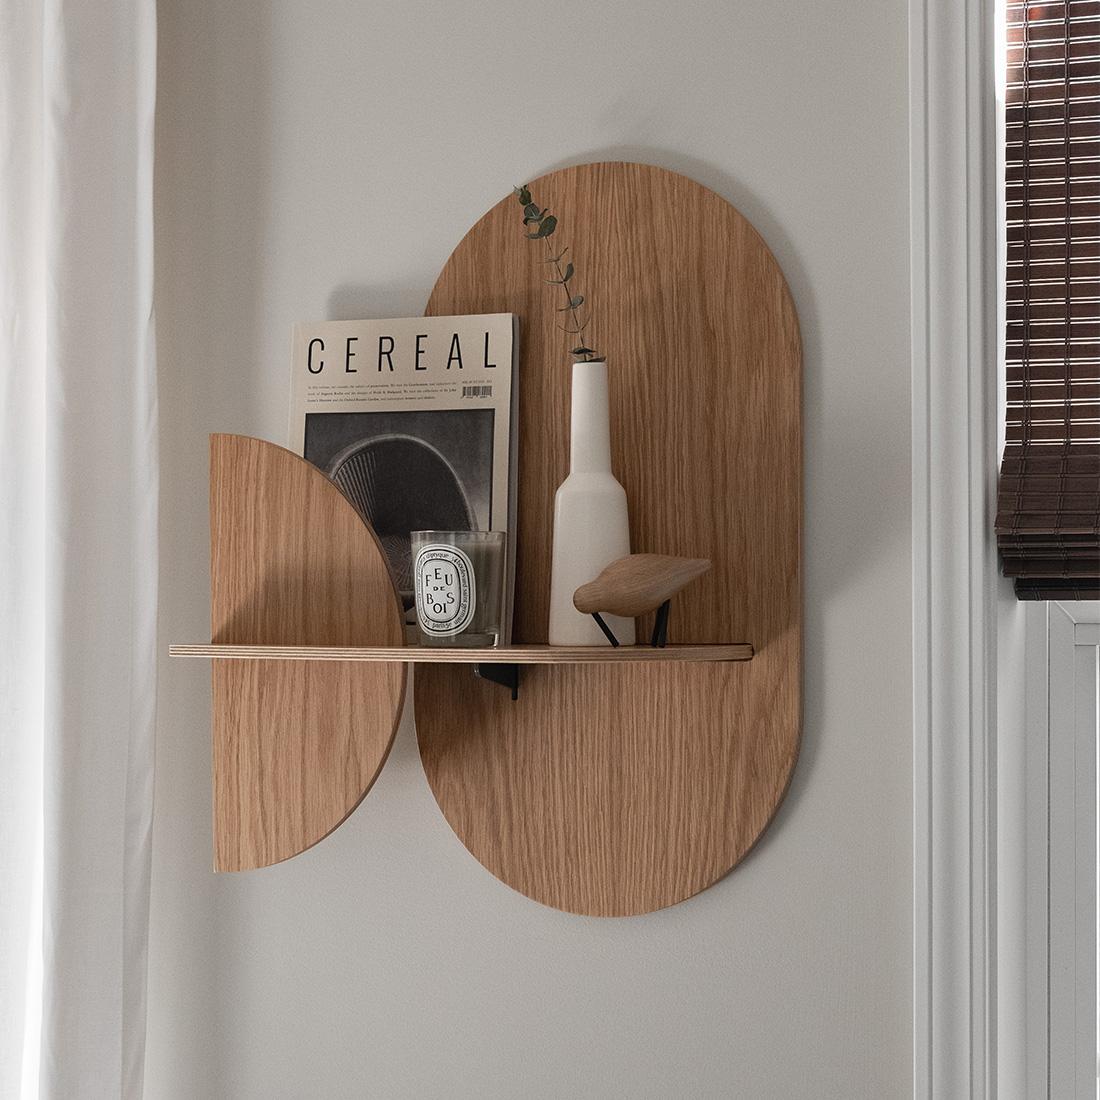 A versatile piece of furniture that can be used as a wall shelf with hidden storage and as a bedside table with concealed storage. Alba means “sunrise” in Spanish, hence its name, since the two front pieces of the product simulate the sun and the